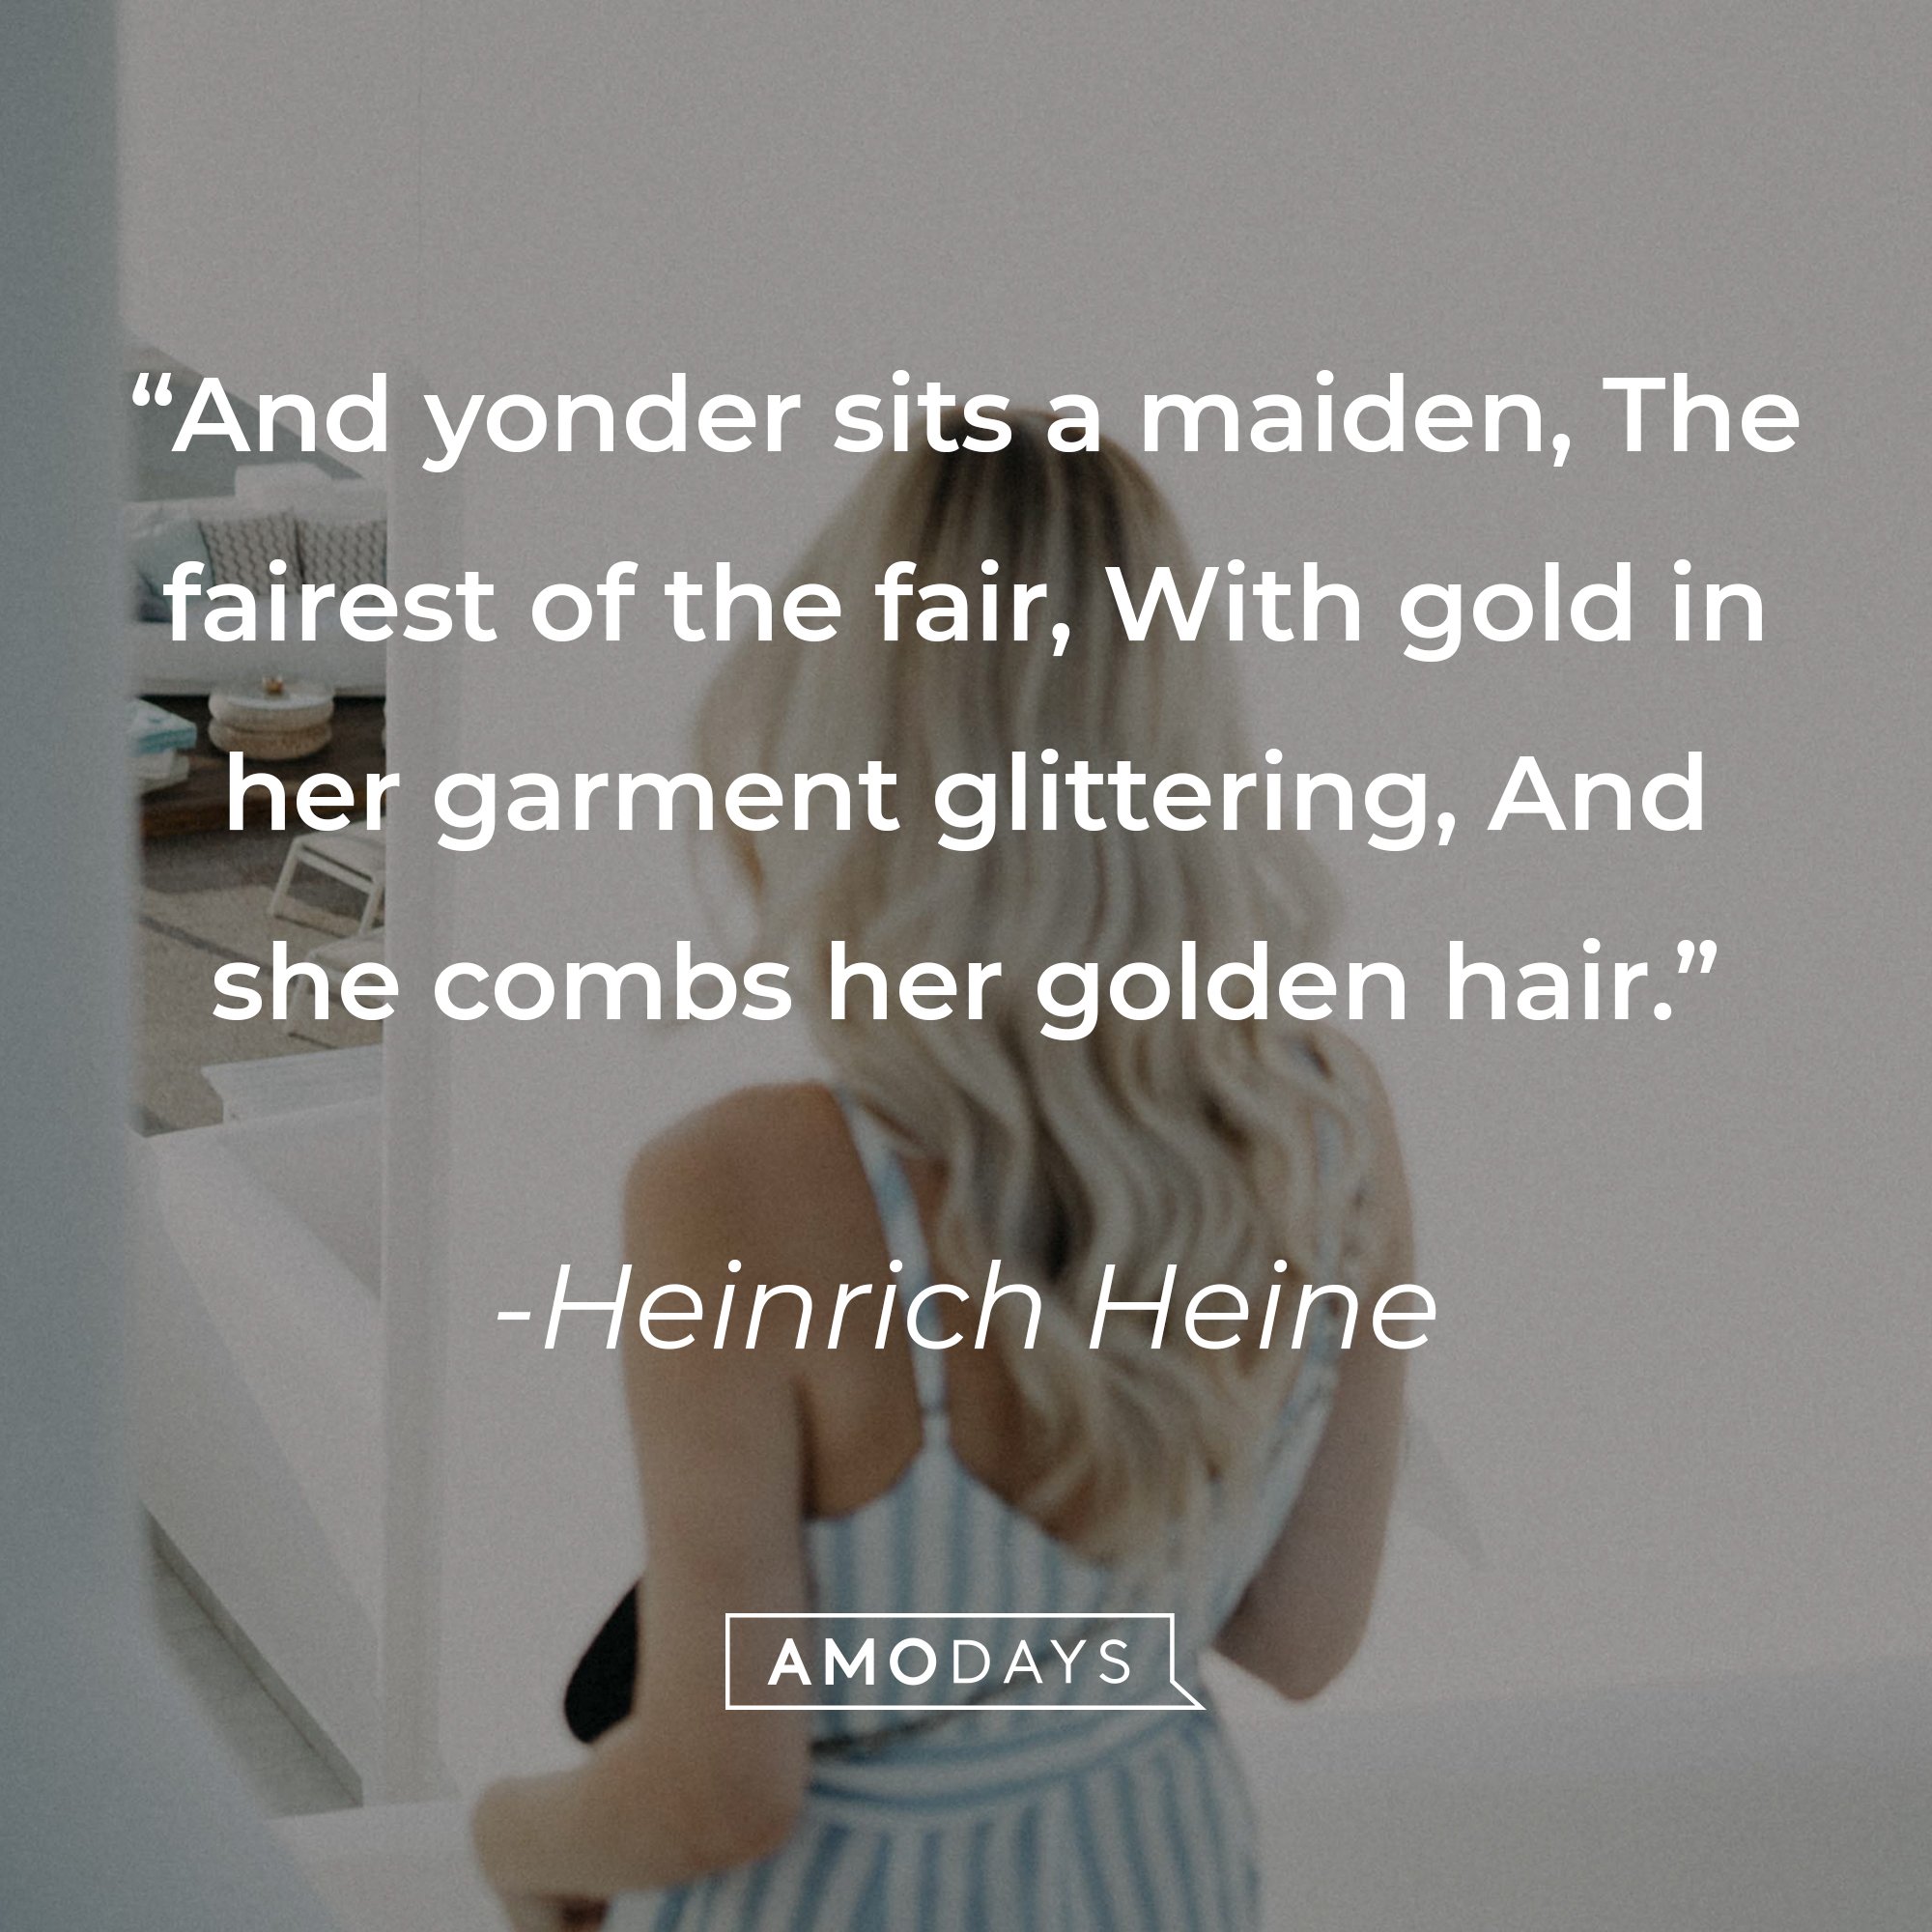  Heinrich Heine’s quote: "And yonder sits a maiden, The fairest of the fair, With gold in her garment glittering, And she combs her golden hair." | Image: AmoDays